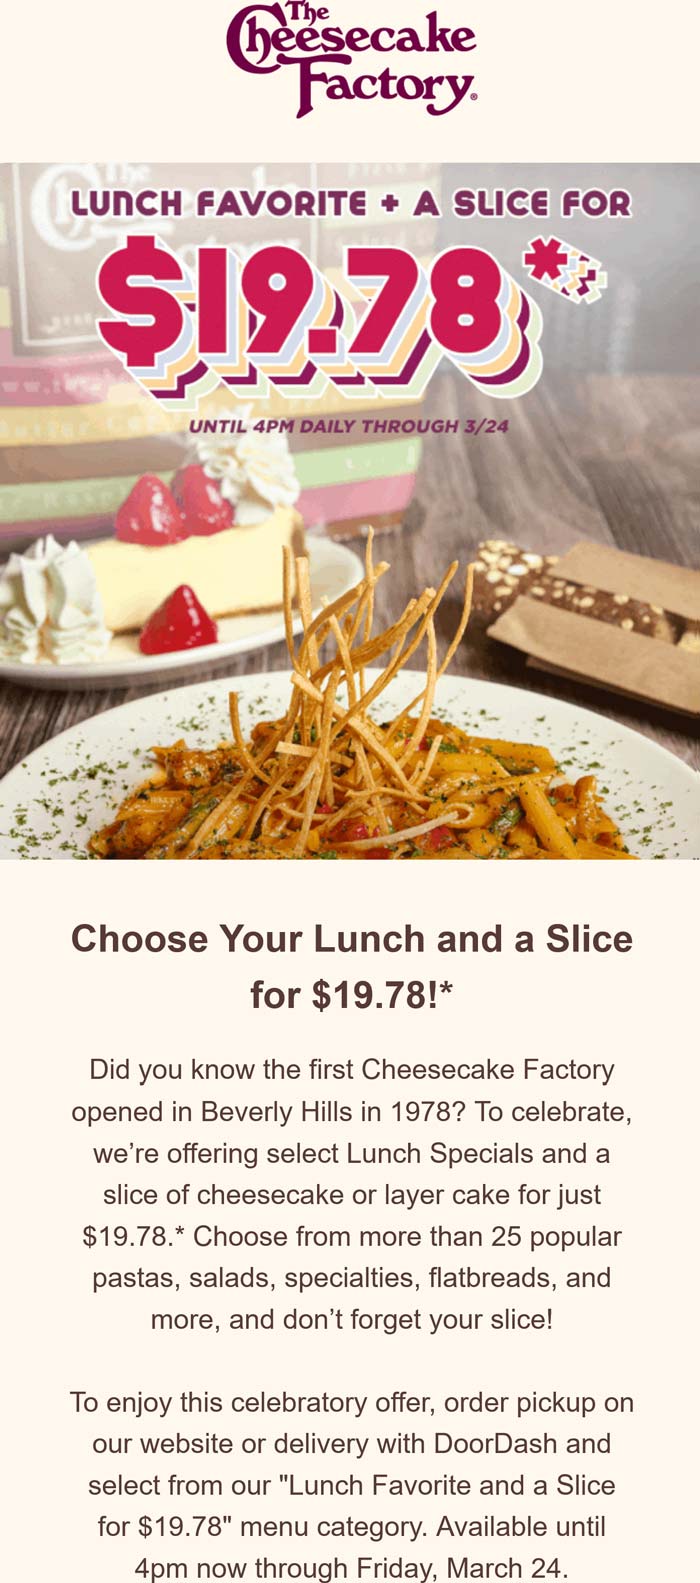 The Cheesecake Factory restaurants Coupon  Lunch + slice of cheesecake = $19.78 at The Cheesecake Factory #thecheesecakefactory 